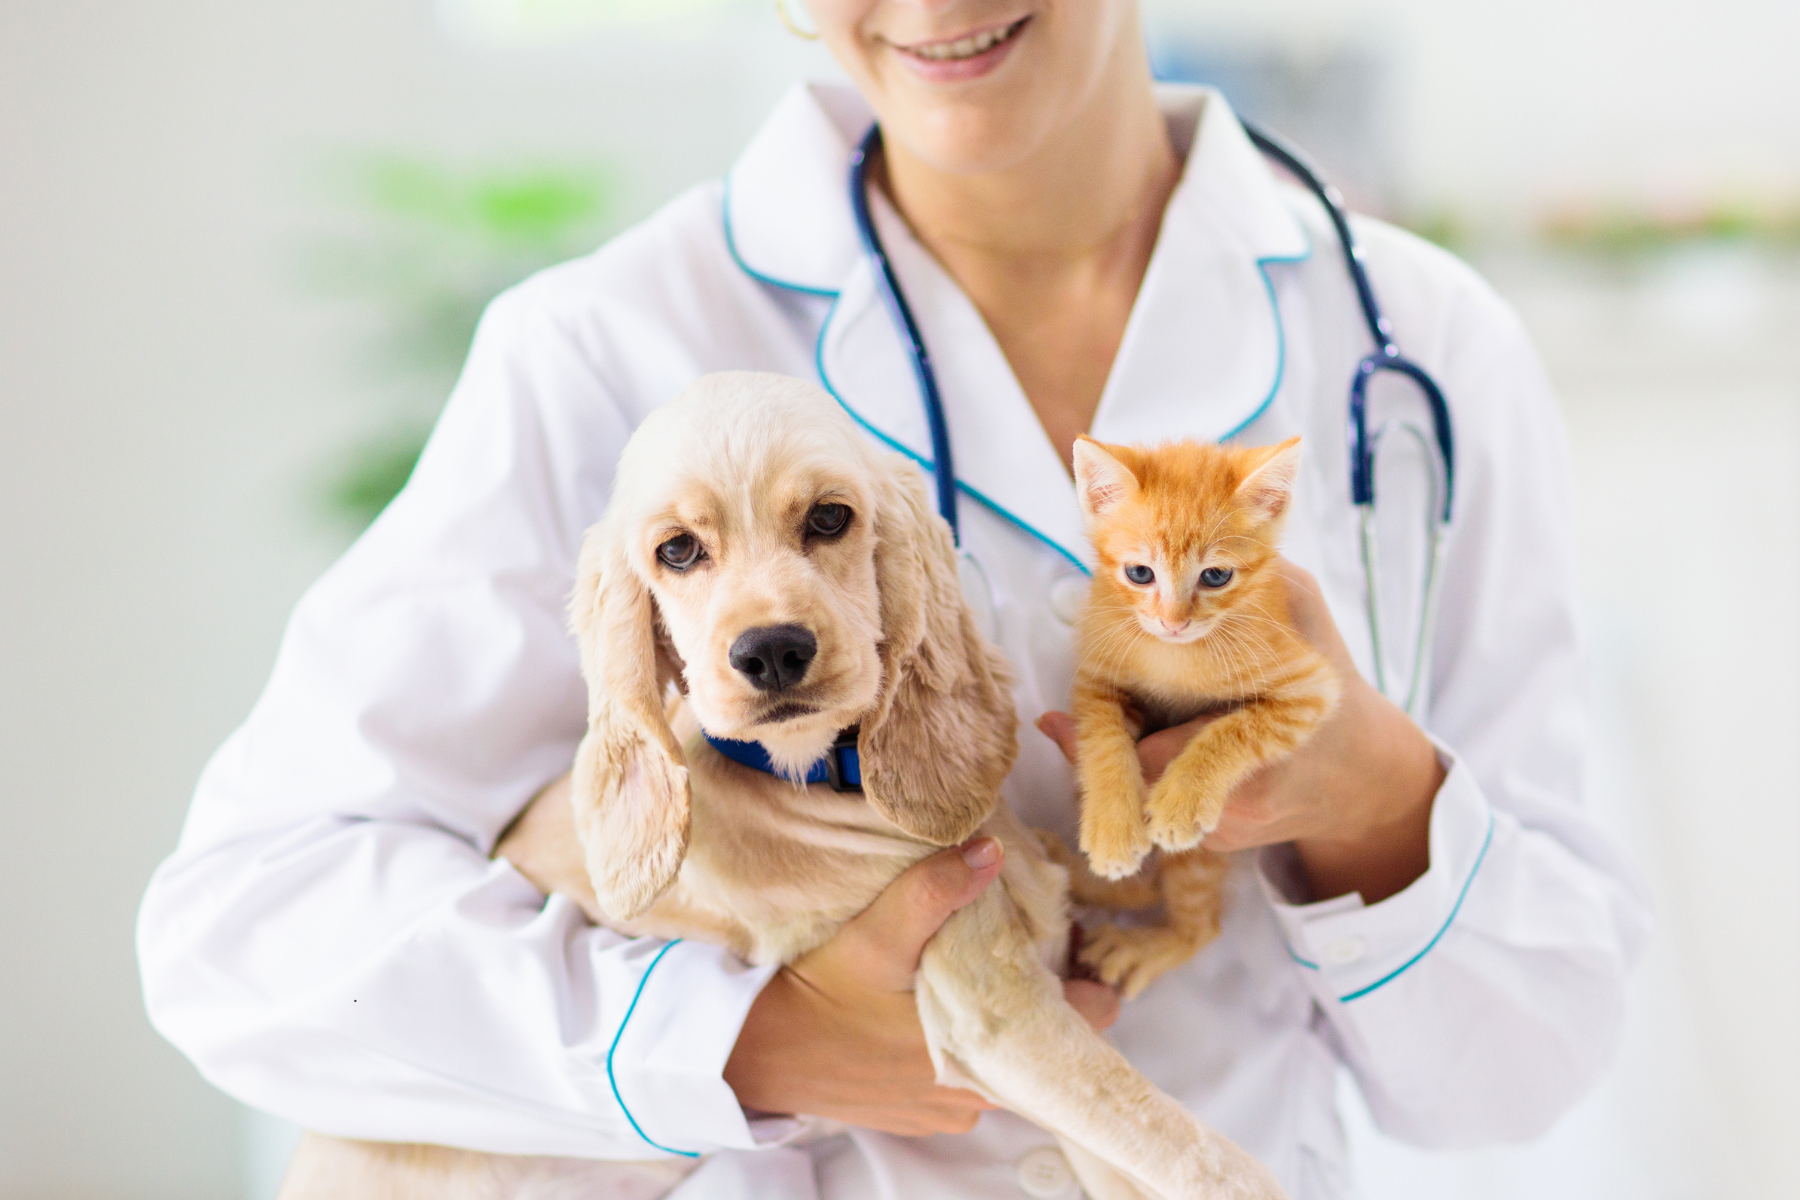 Preparing Your Pet for Their First Vet Appointment